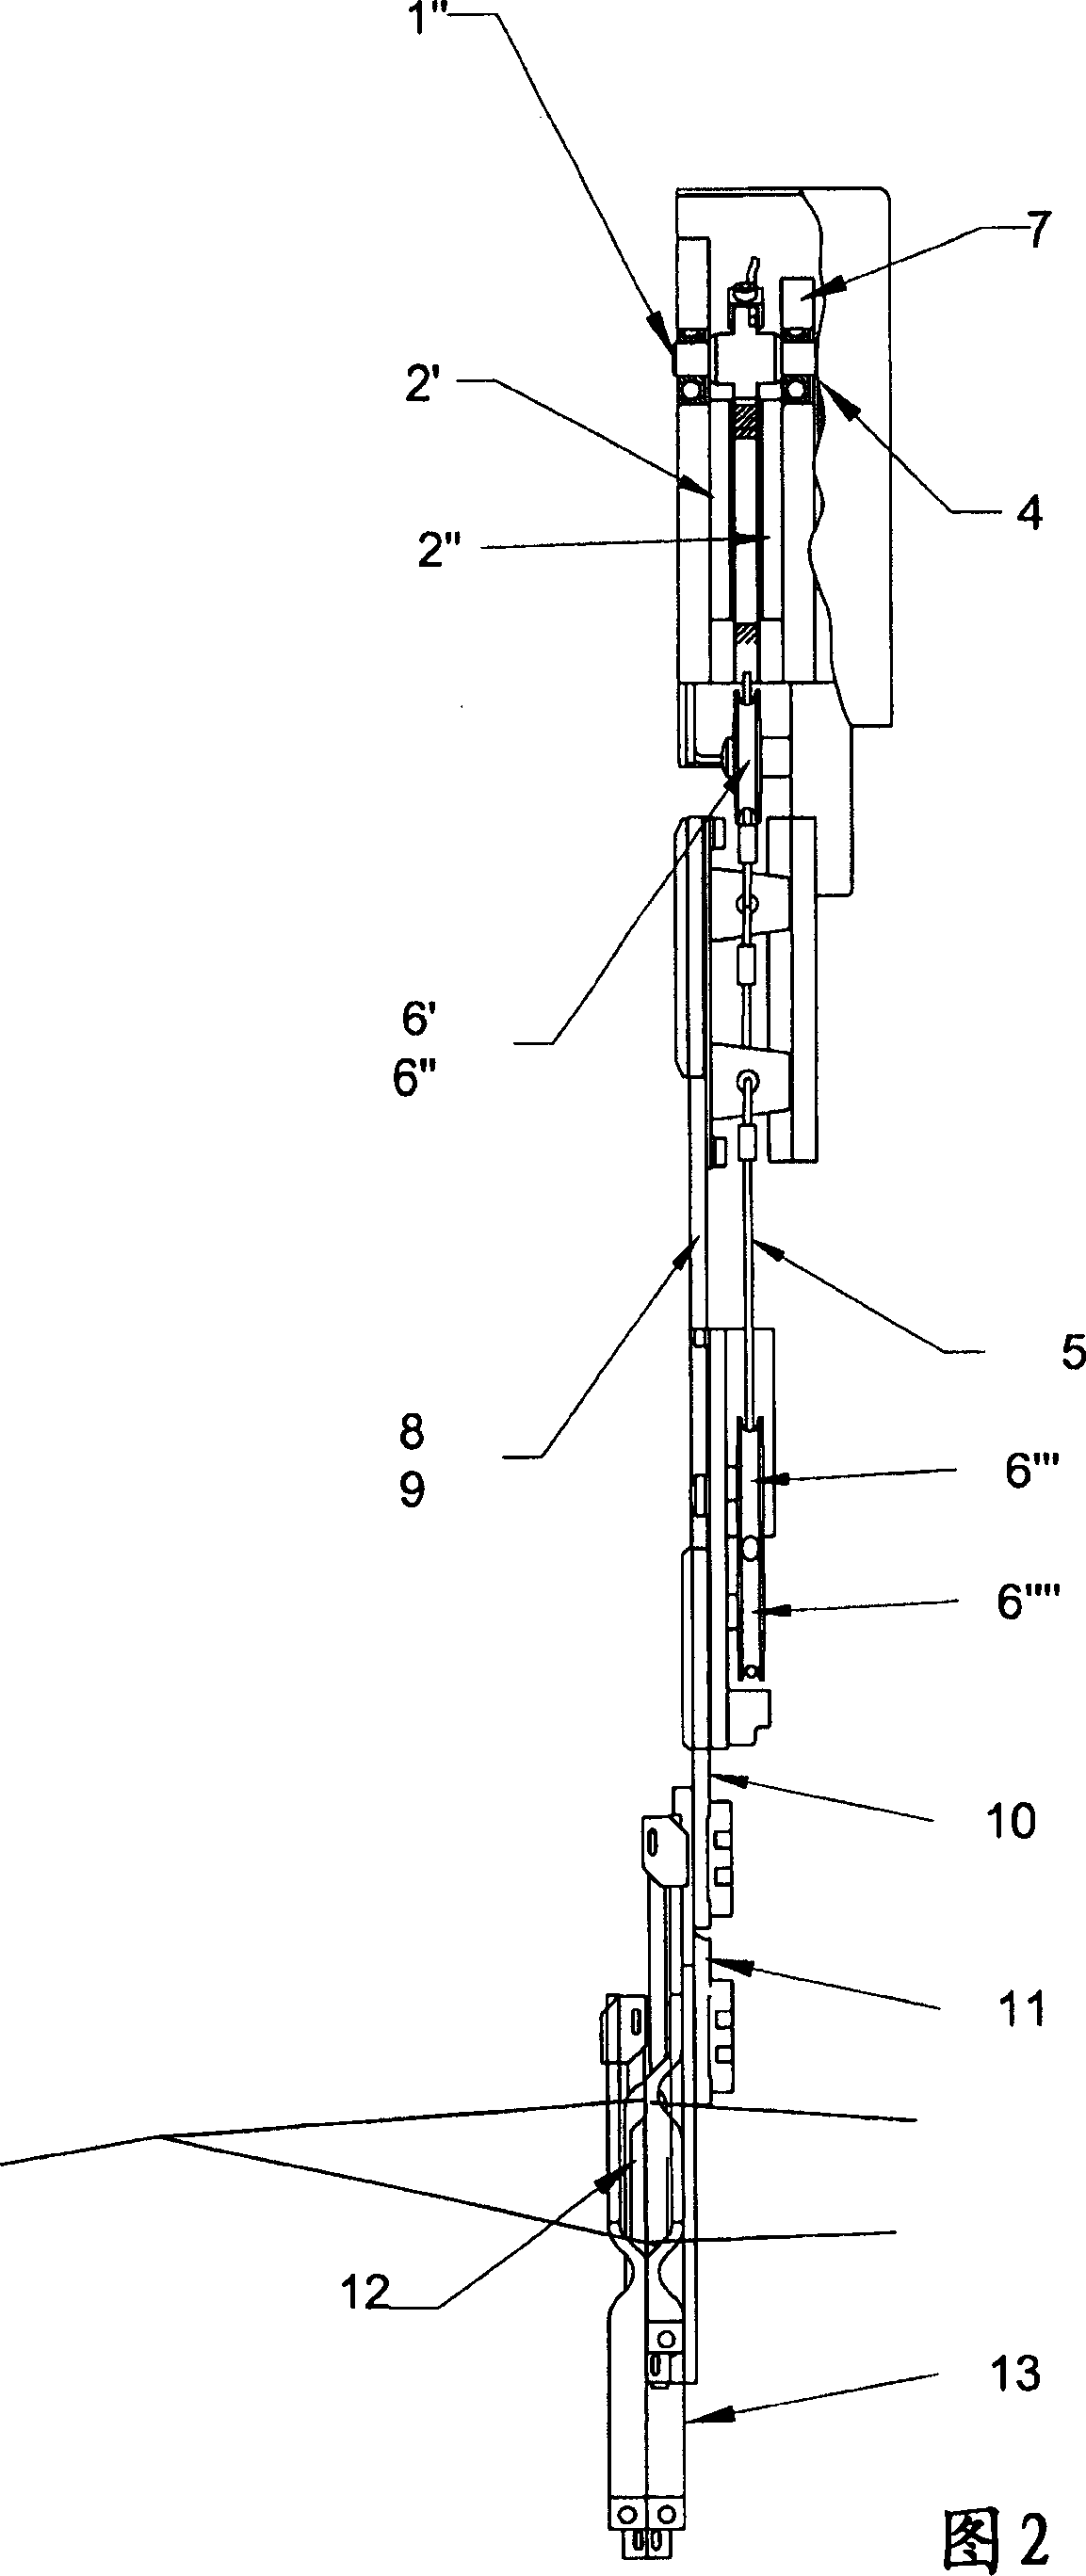 Angular servo-motor for the controlled positioning of elements connected to weft or warp yarns in a weaving machine